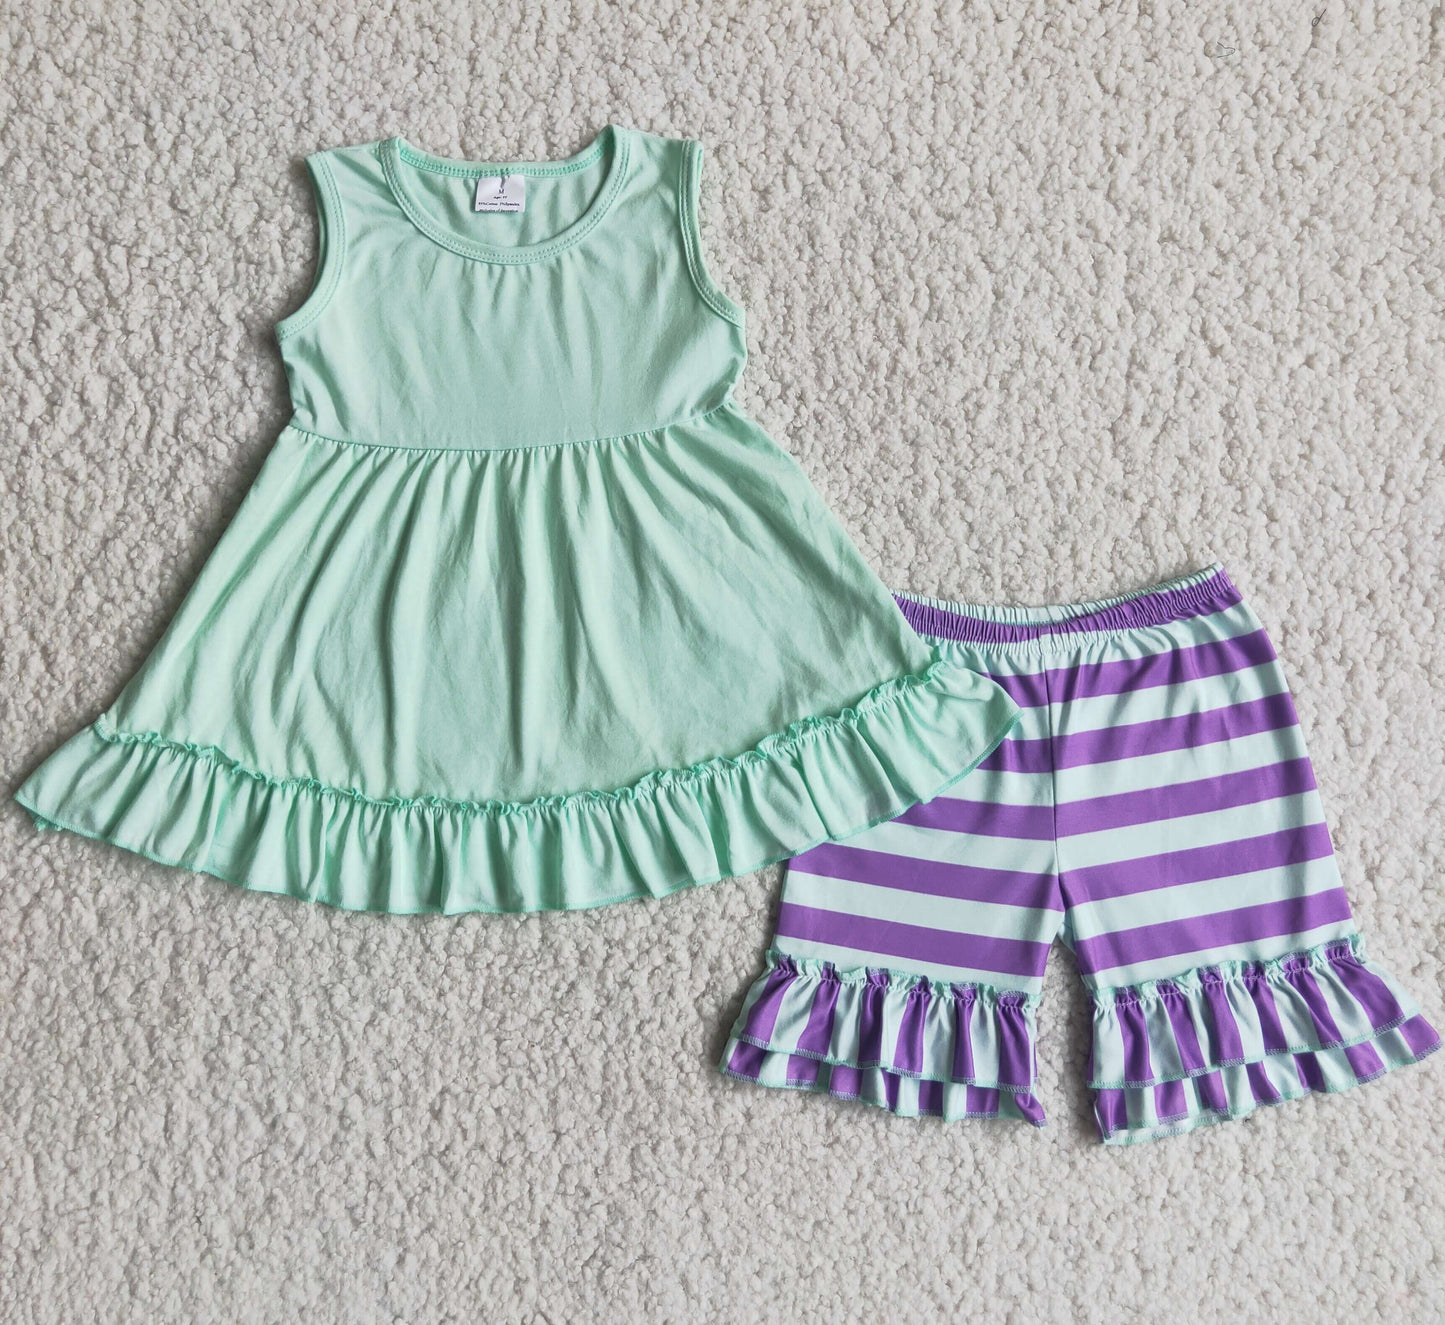 C4-9 Green lace sleeveless top and purple striped shorts